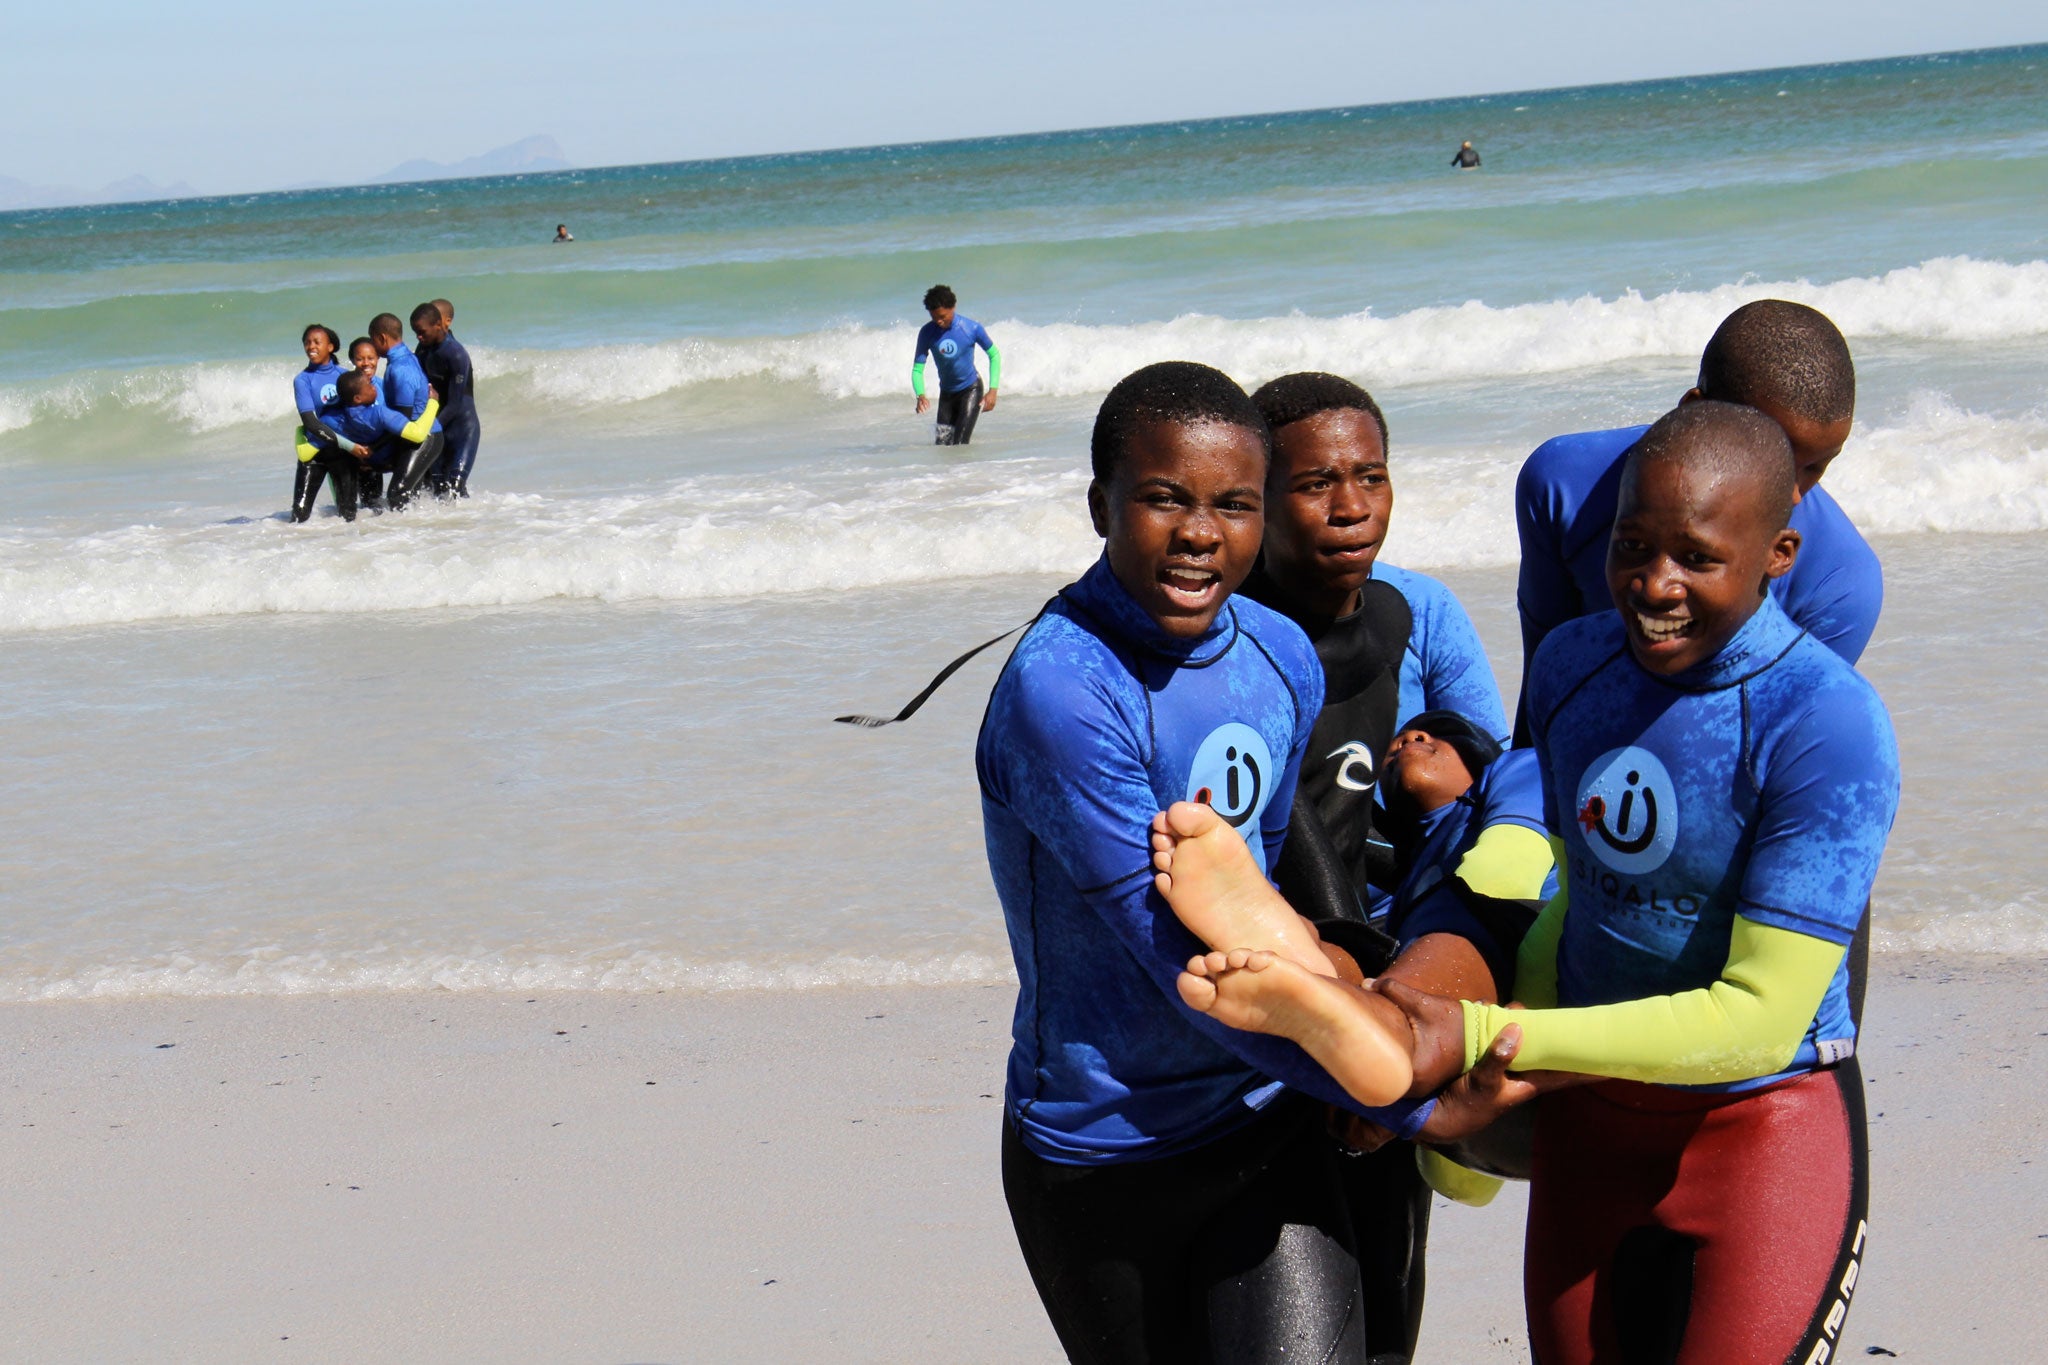 Participants from the Waves for Change programme, a surfing and HIV educational programme founded by the author, perform the "Stigma Lift": an adapted lifesaving exercise which teaches about the negative impact of discrimination against those living with HIV.